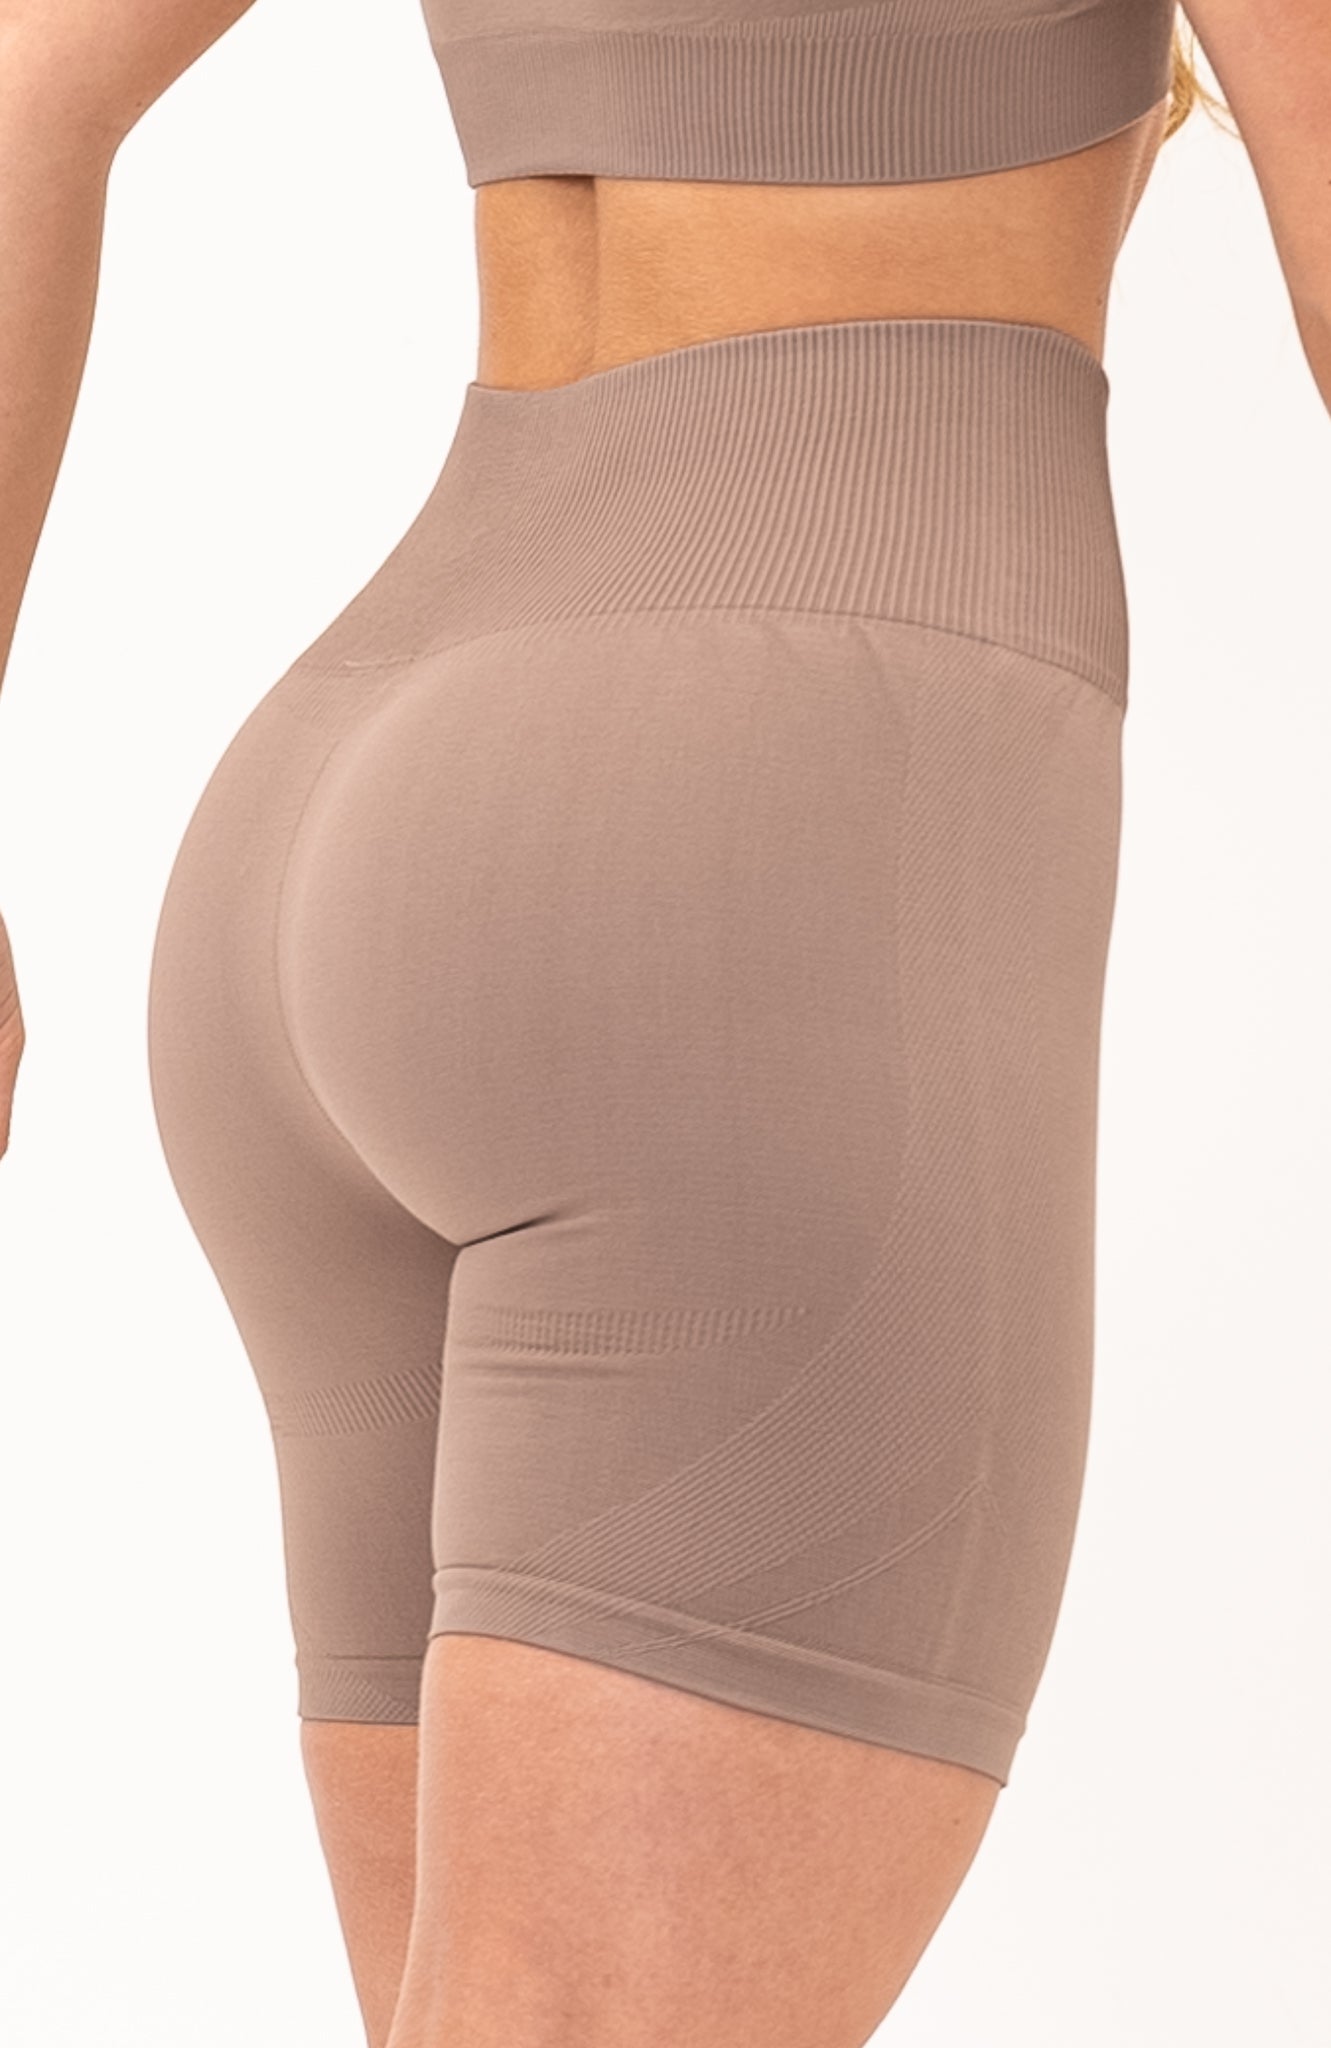 V3 Apparel Women's seamless Limitless high waisted cycle shorts in fawn – Squat proof 5 inch inseam leg bum enhancing shorts for Gym workouts training, Running, yoga, bodybuilding and bikini fitness.